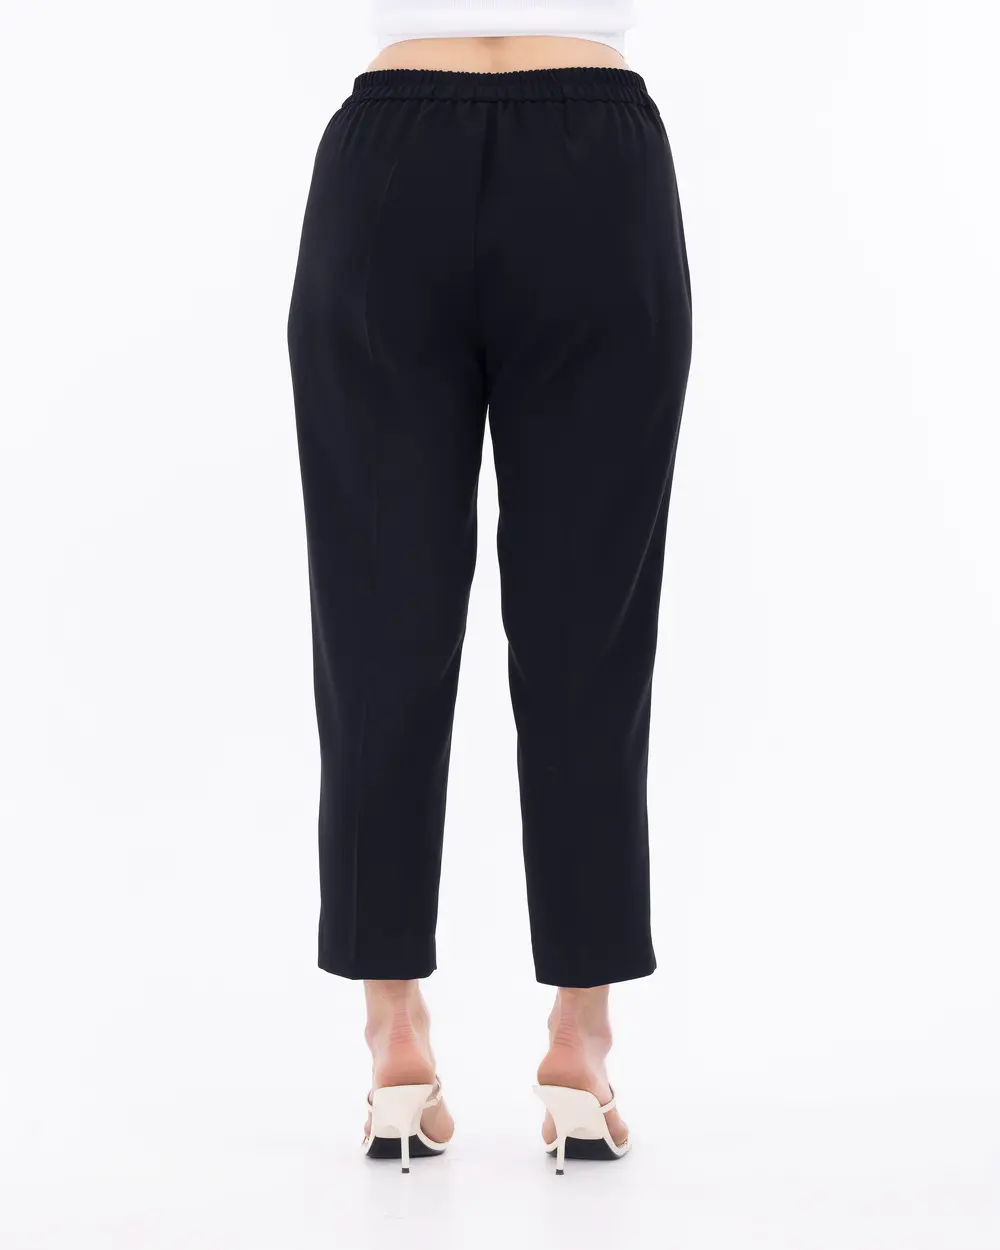 Plus Size Carrot Cut Ankle Length Trousers